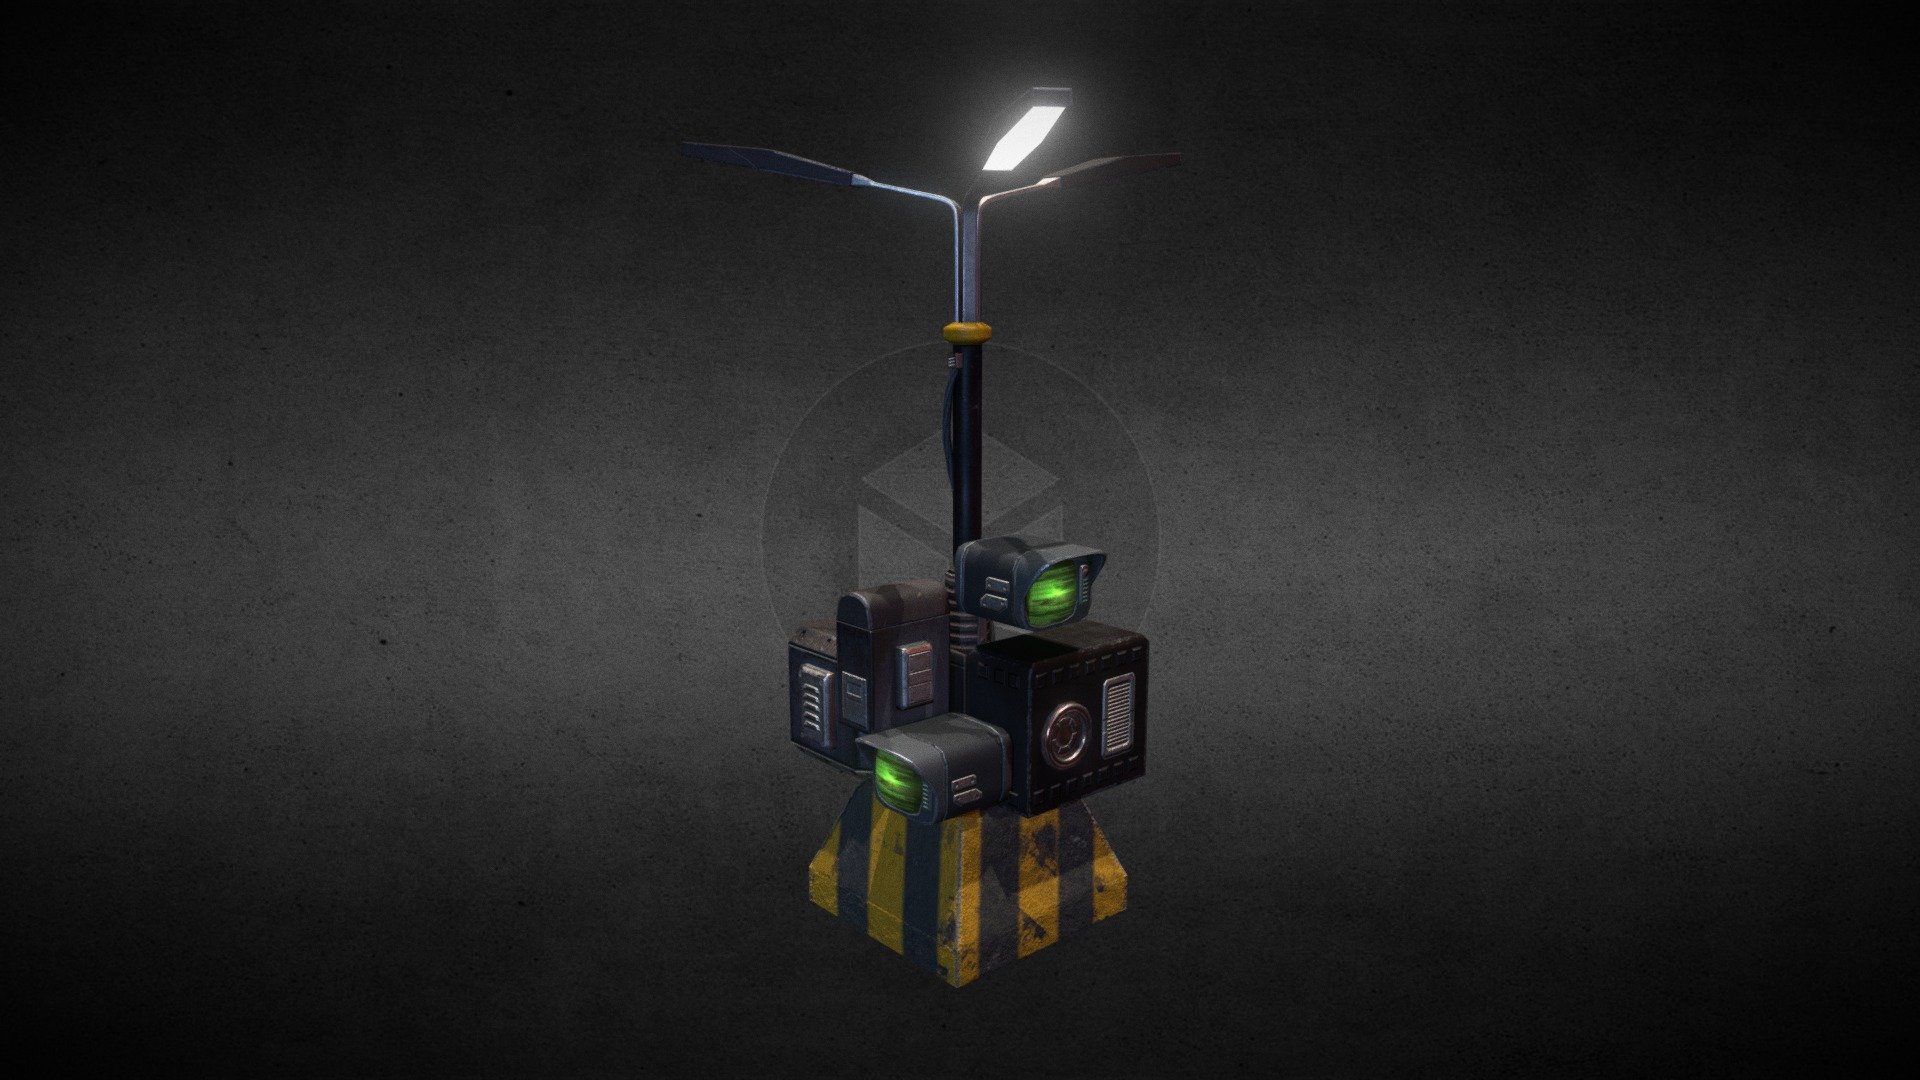 Another Syd Mead Blade Runner Prop! This one is my take on the street lamp with terminals/computers on it. Modeled in Blender, textured in Substance Painter, shown here in Metalness PBR 3d model